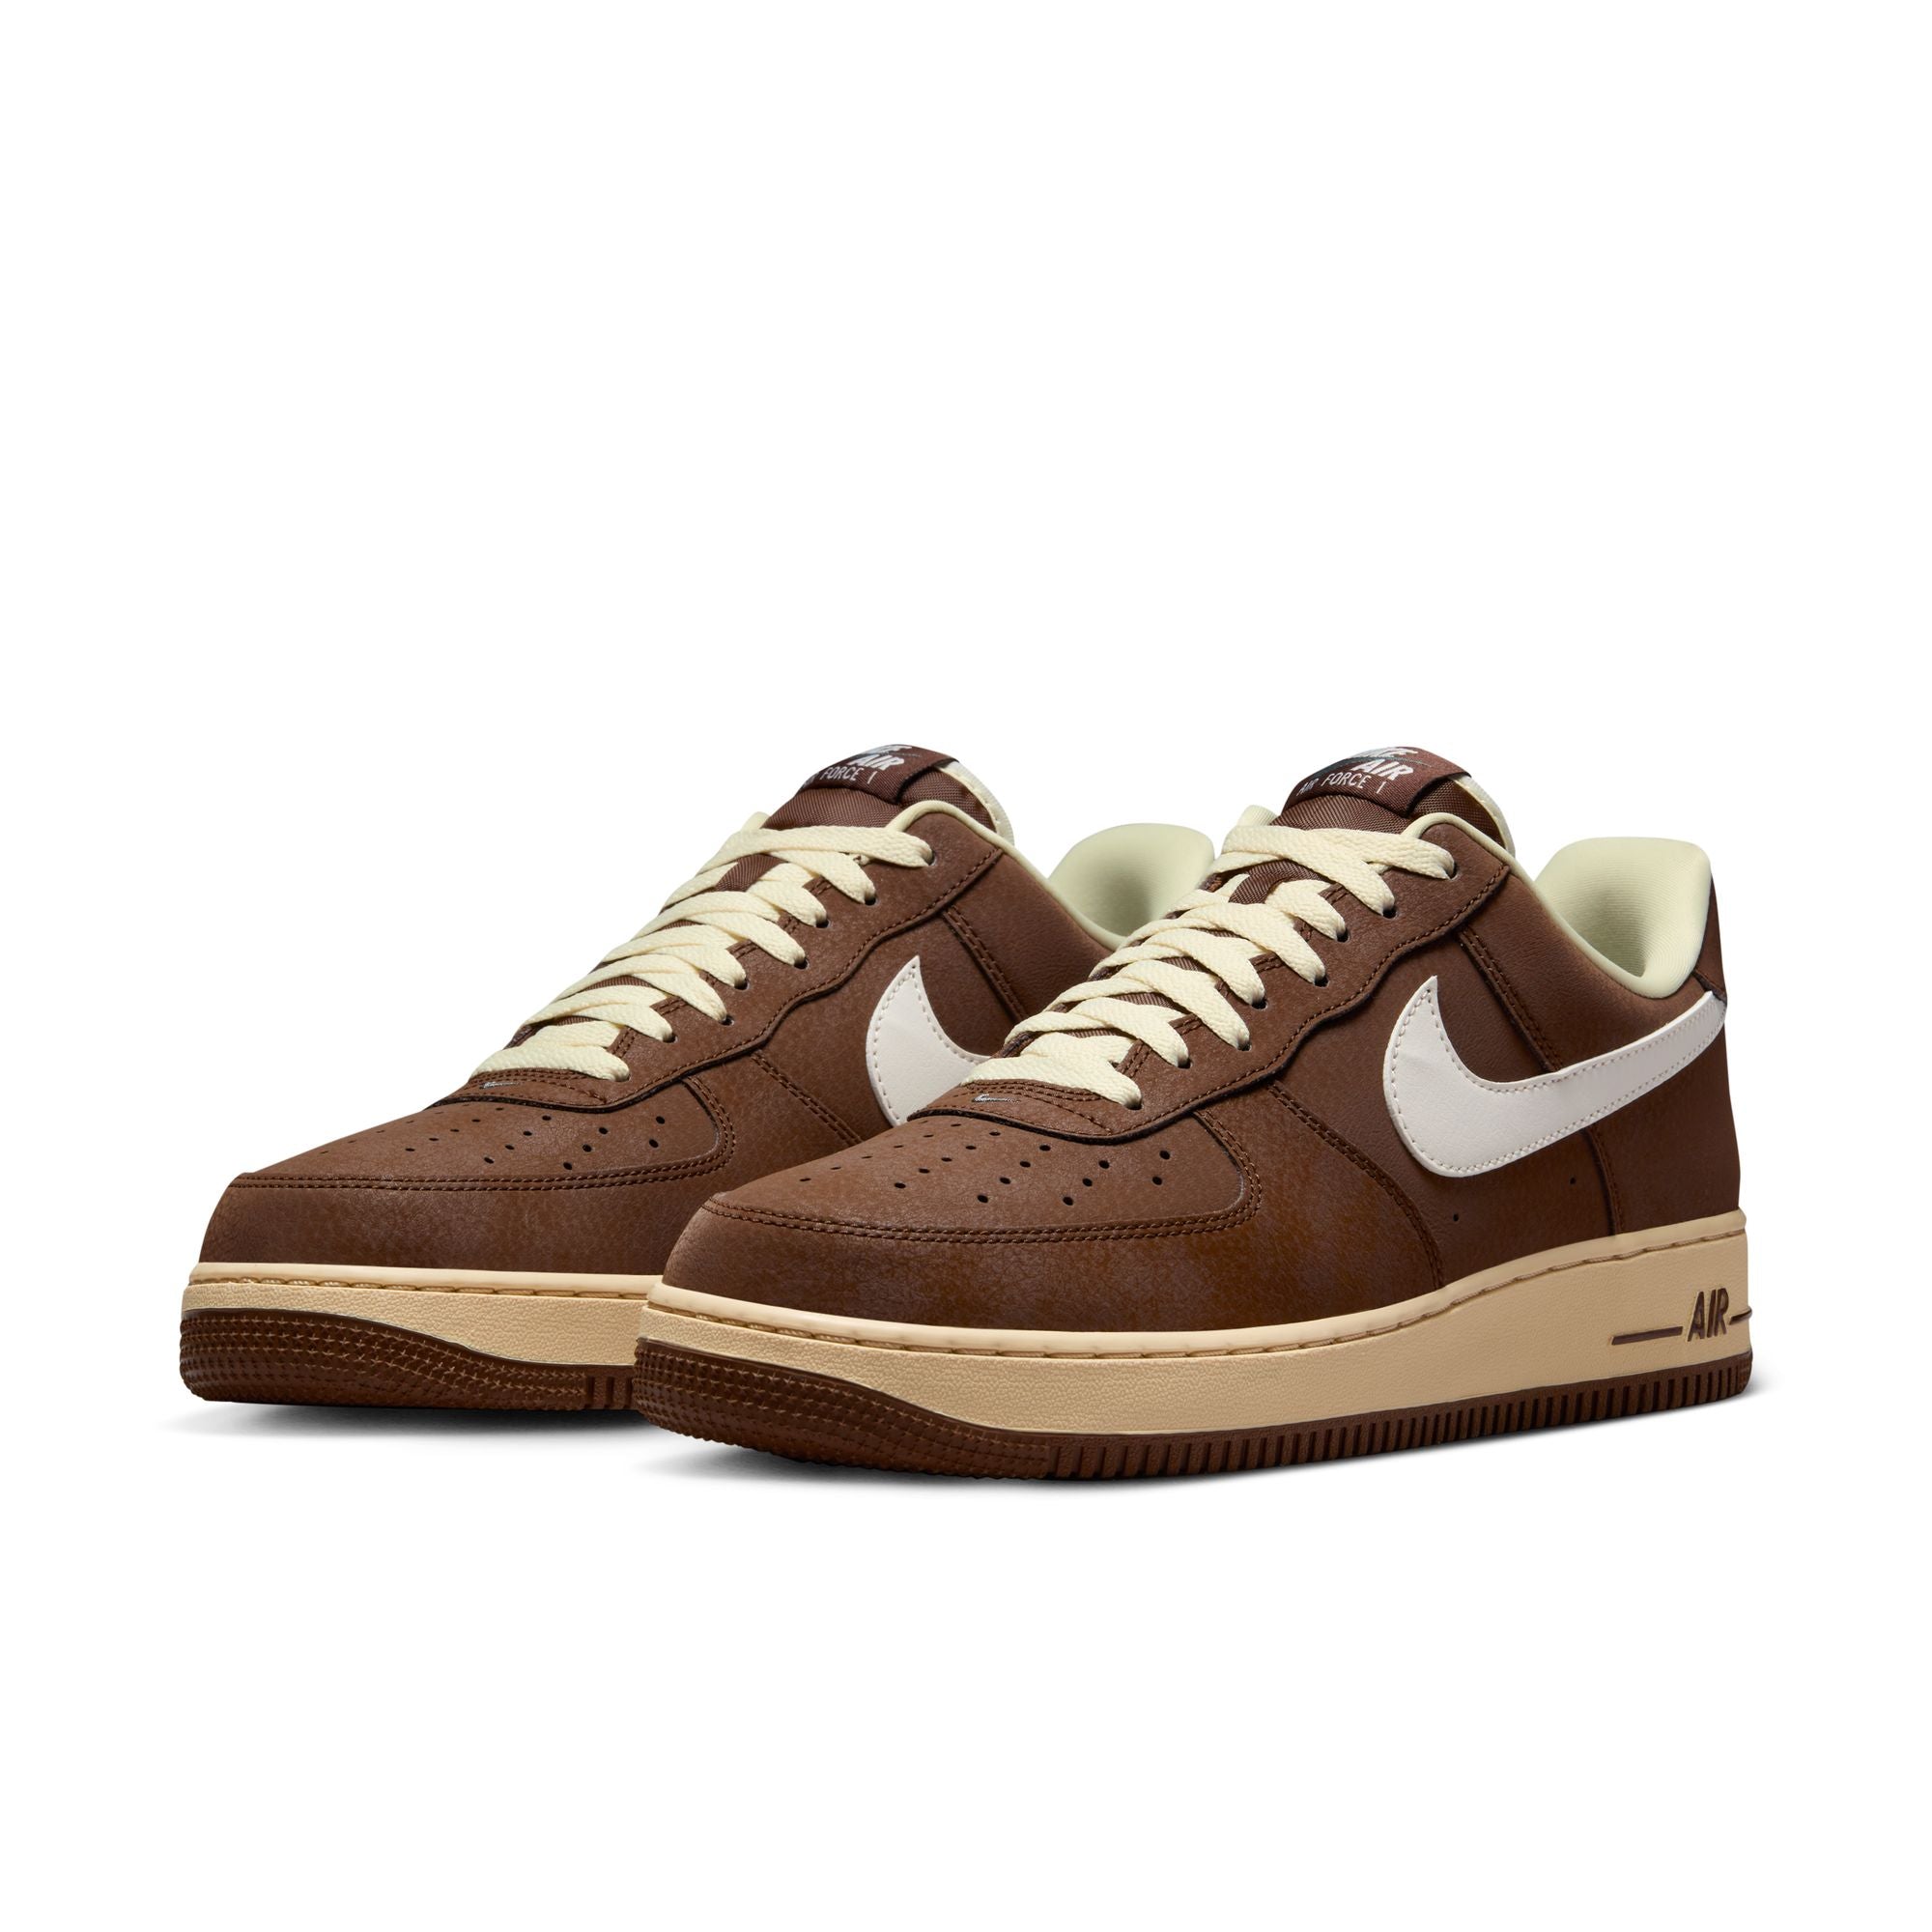 Nike Air Force 1 '07 "Cacao Wow Coconut Milk" - Men's